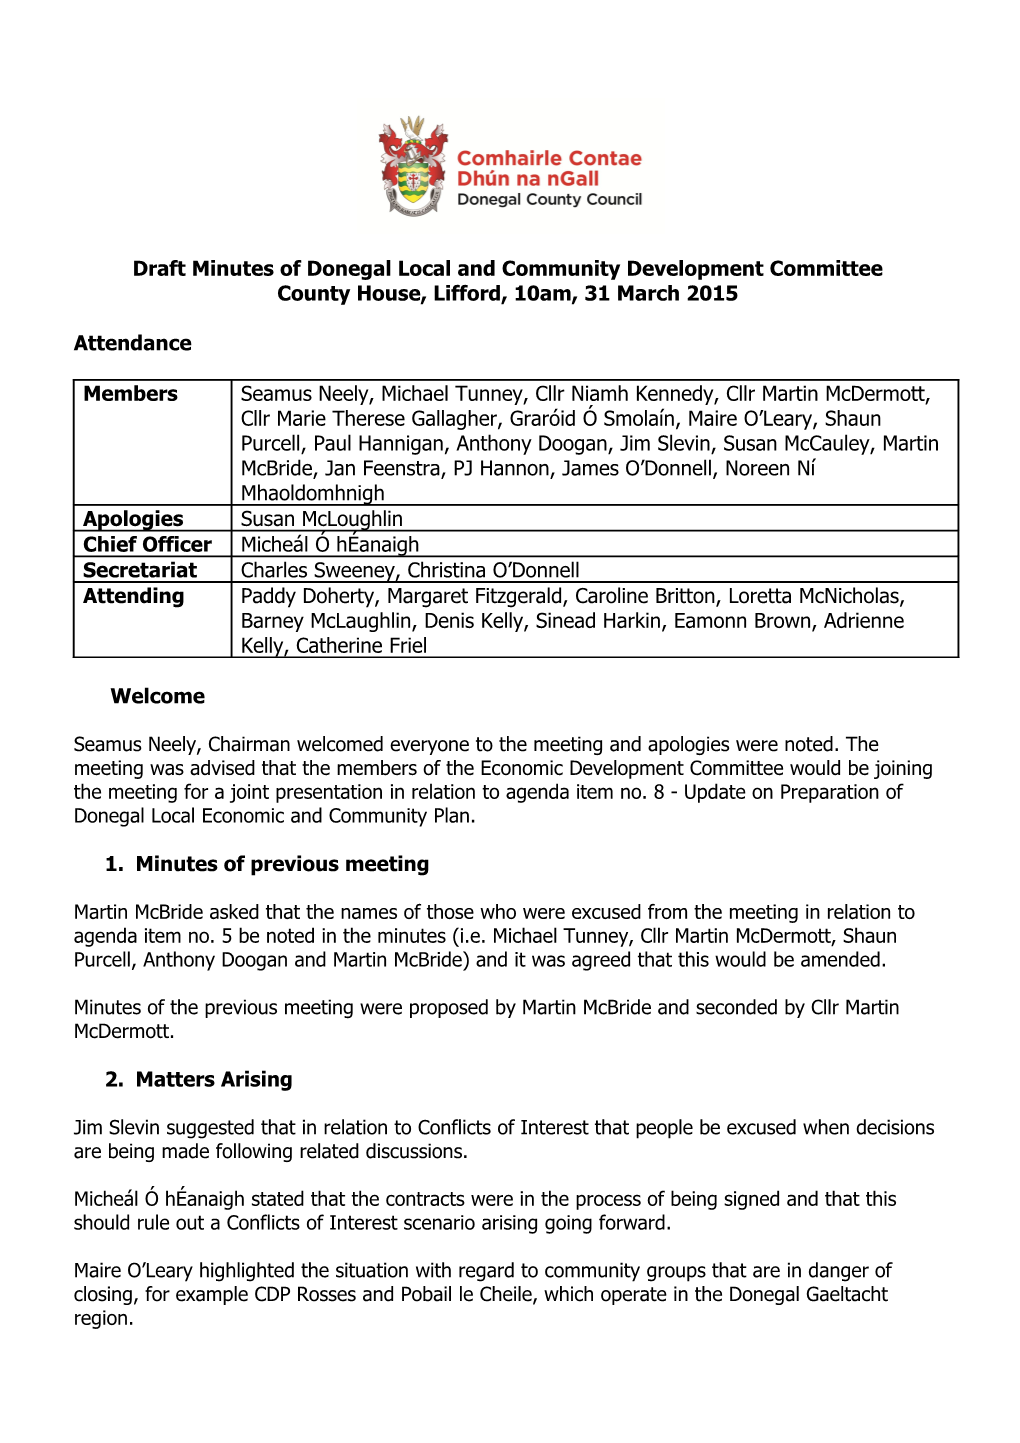 Draft Minutes of Donegal Local and Community Development Committee